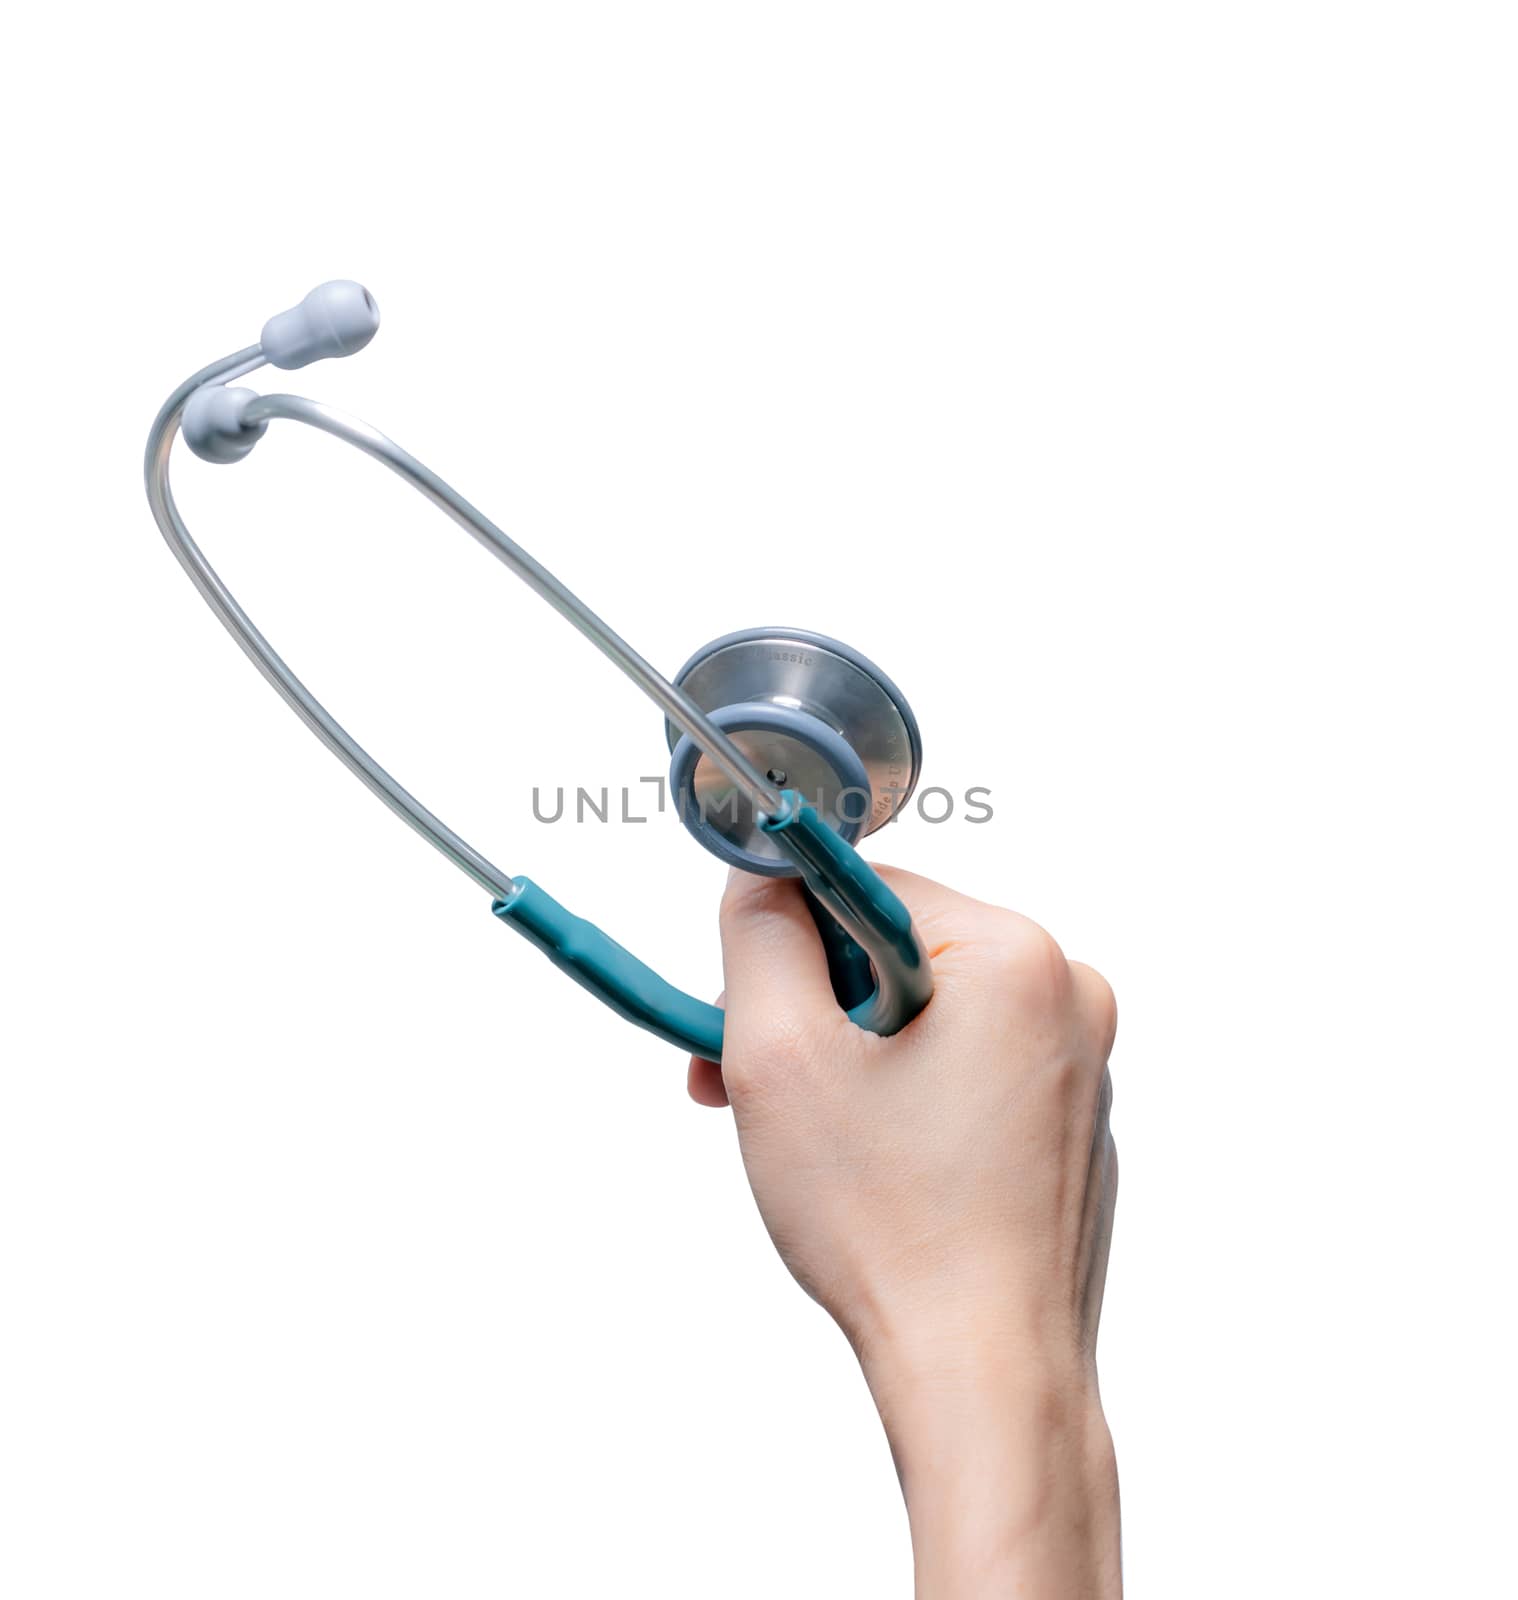 Hand holding stethoscope isolated on white background. Health checkup. Healthcare and medicine background. Diagnostic medical tool for patient diagnosis. Cardiology doctor. Heart care and healthcare.